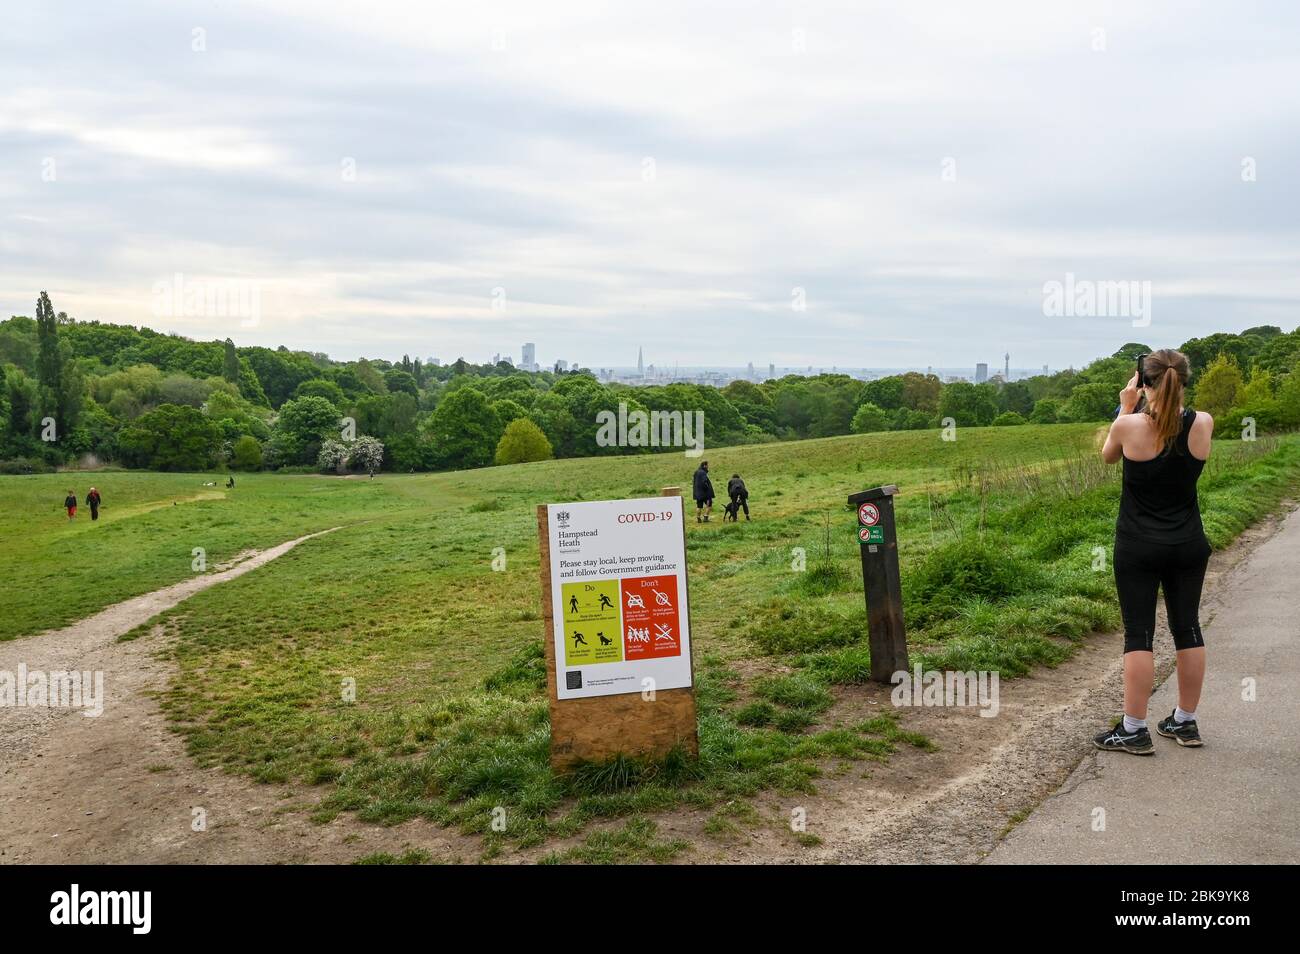 Hampstead Heath and London skyline, with illustrated instructions during the Covid-19 pandemic. People walk and run observing social distancing. Stock Photo